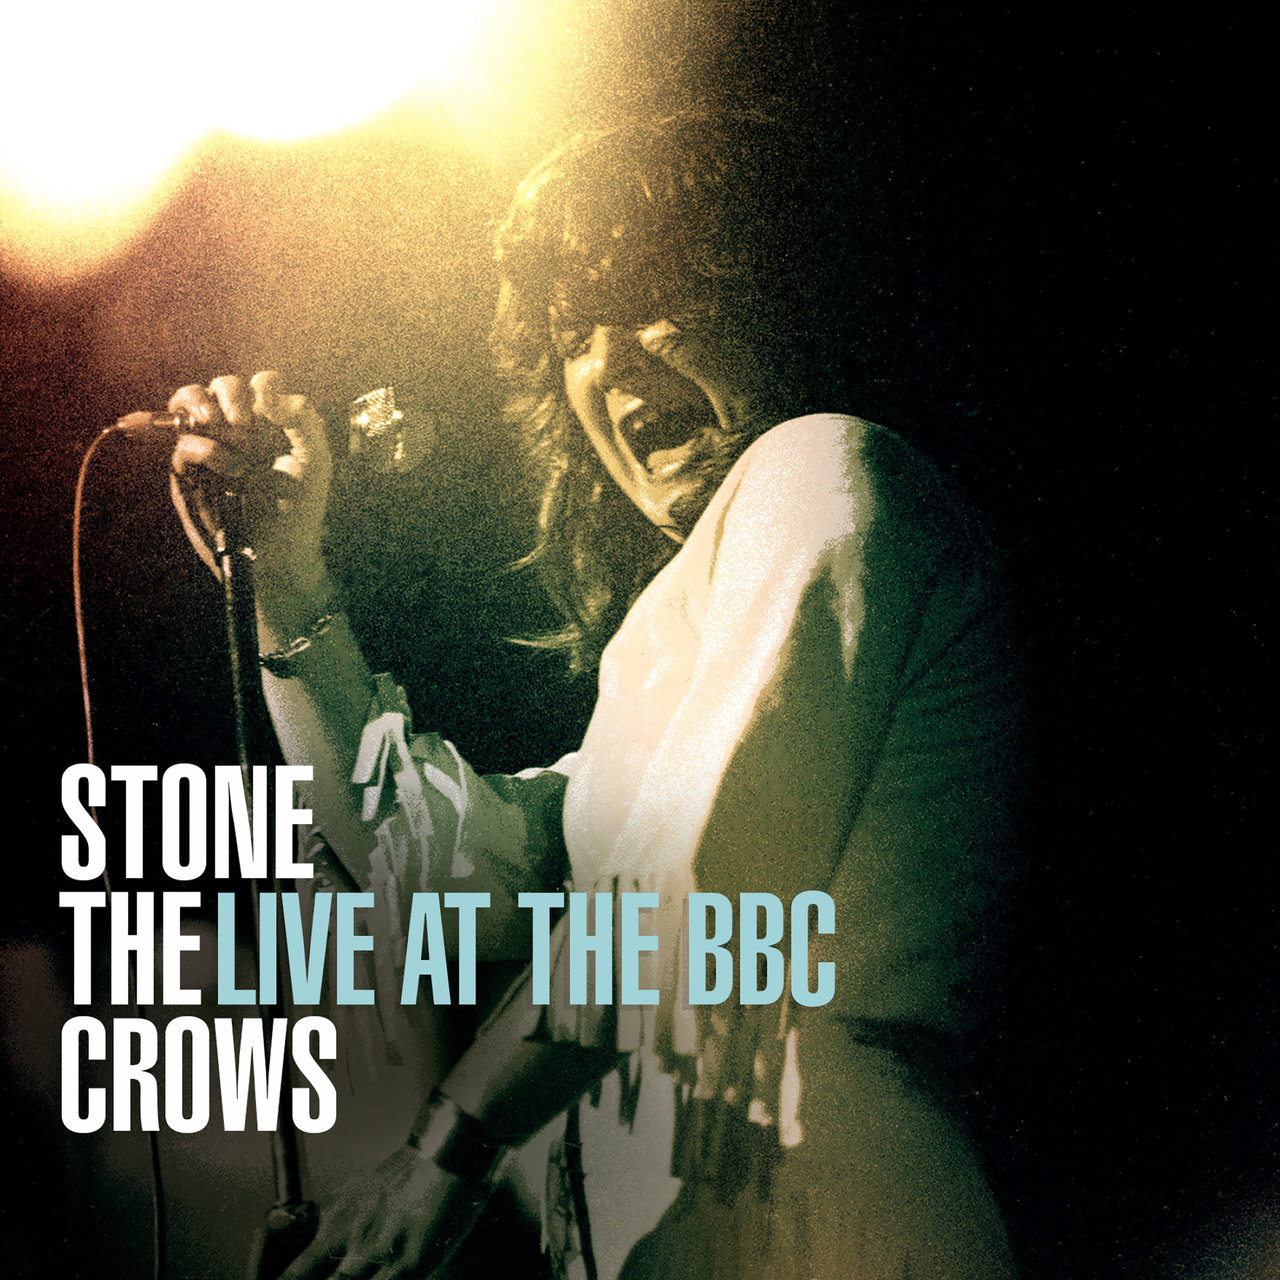 Stone The Crows - Live at the BBC [2022] cd2